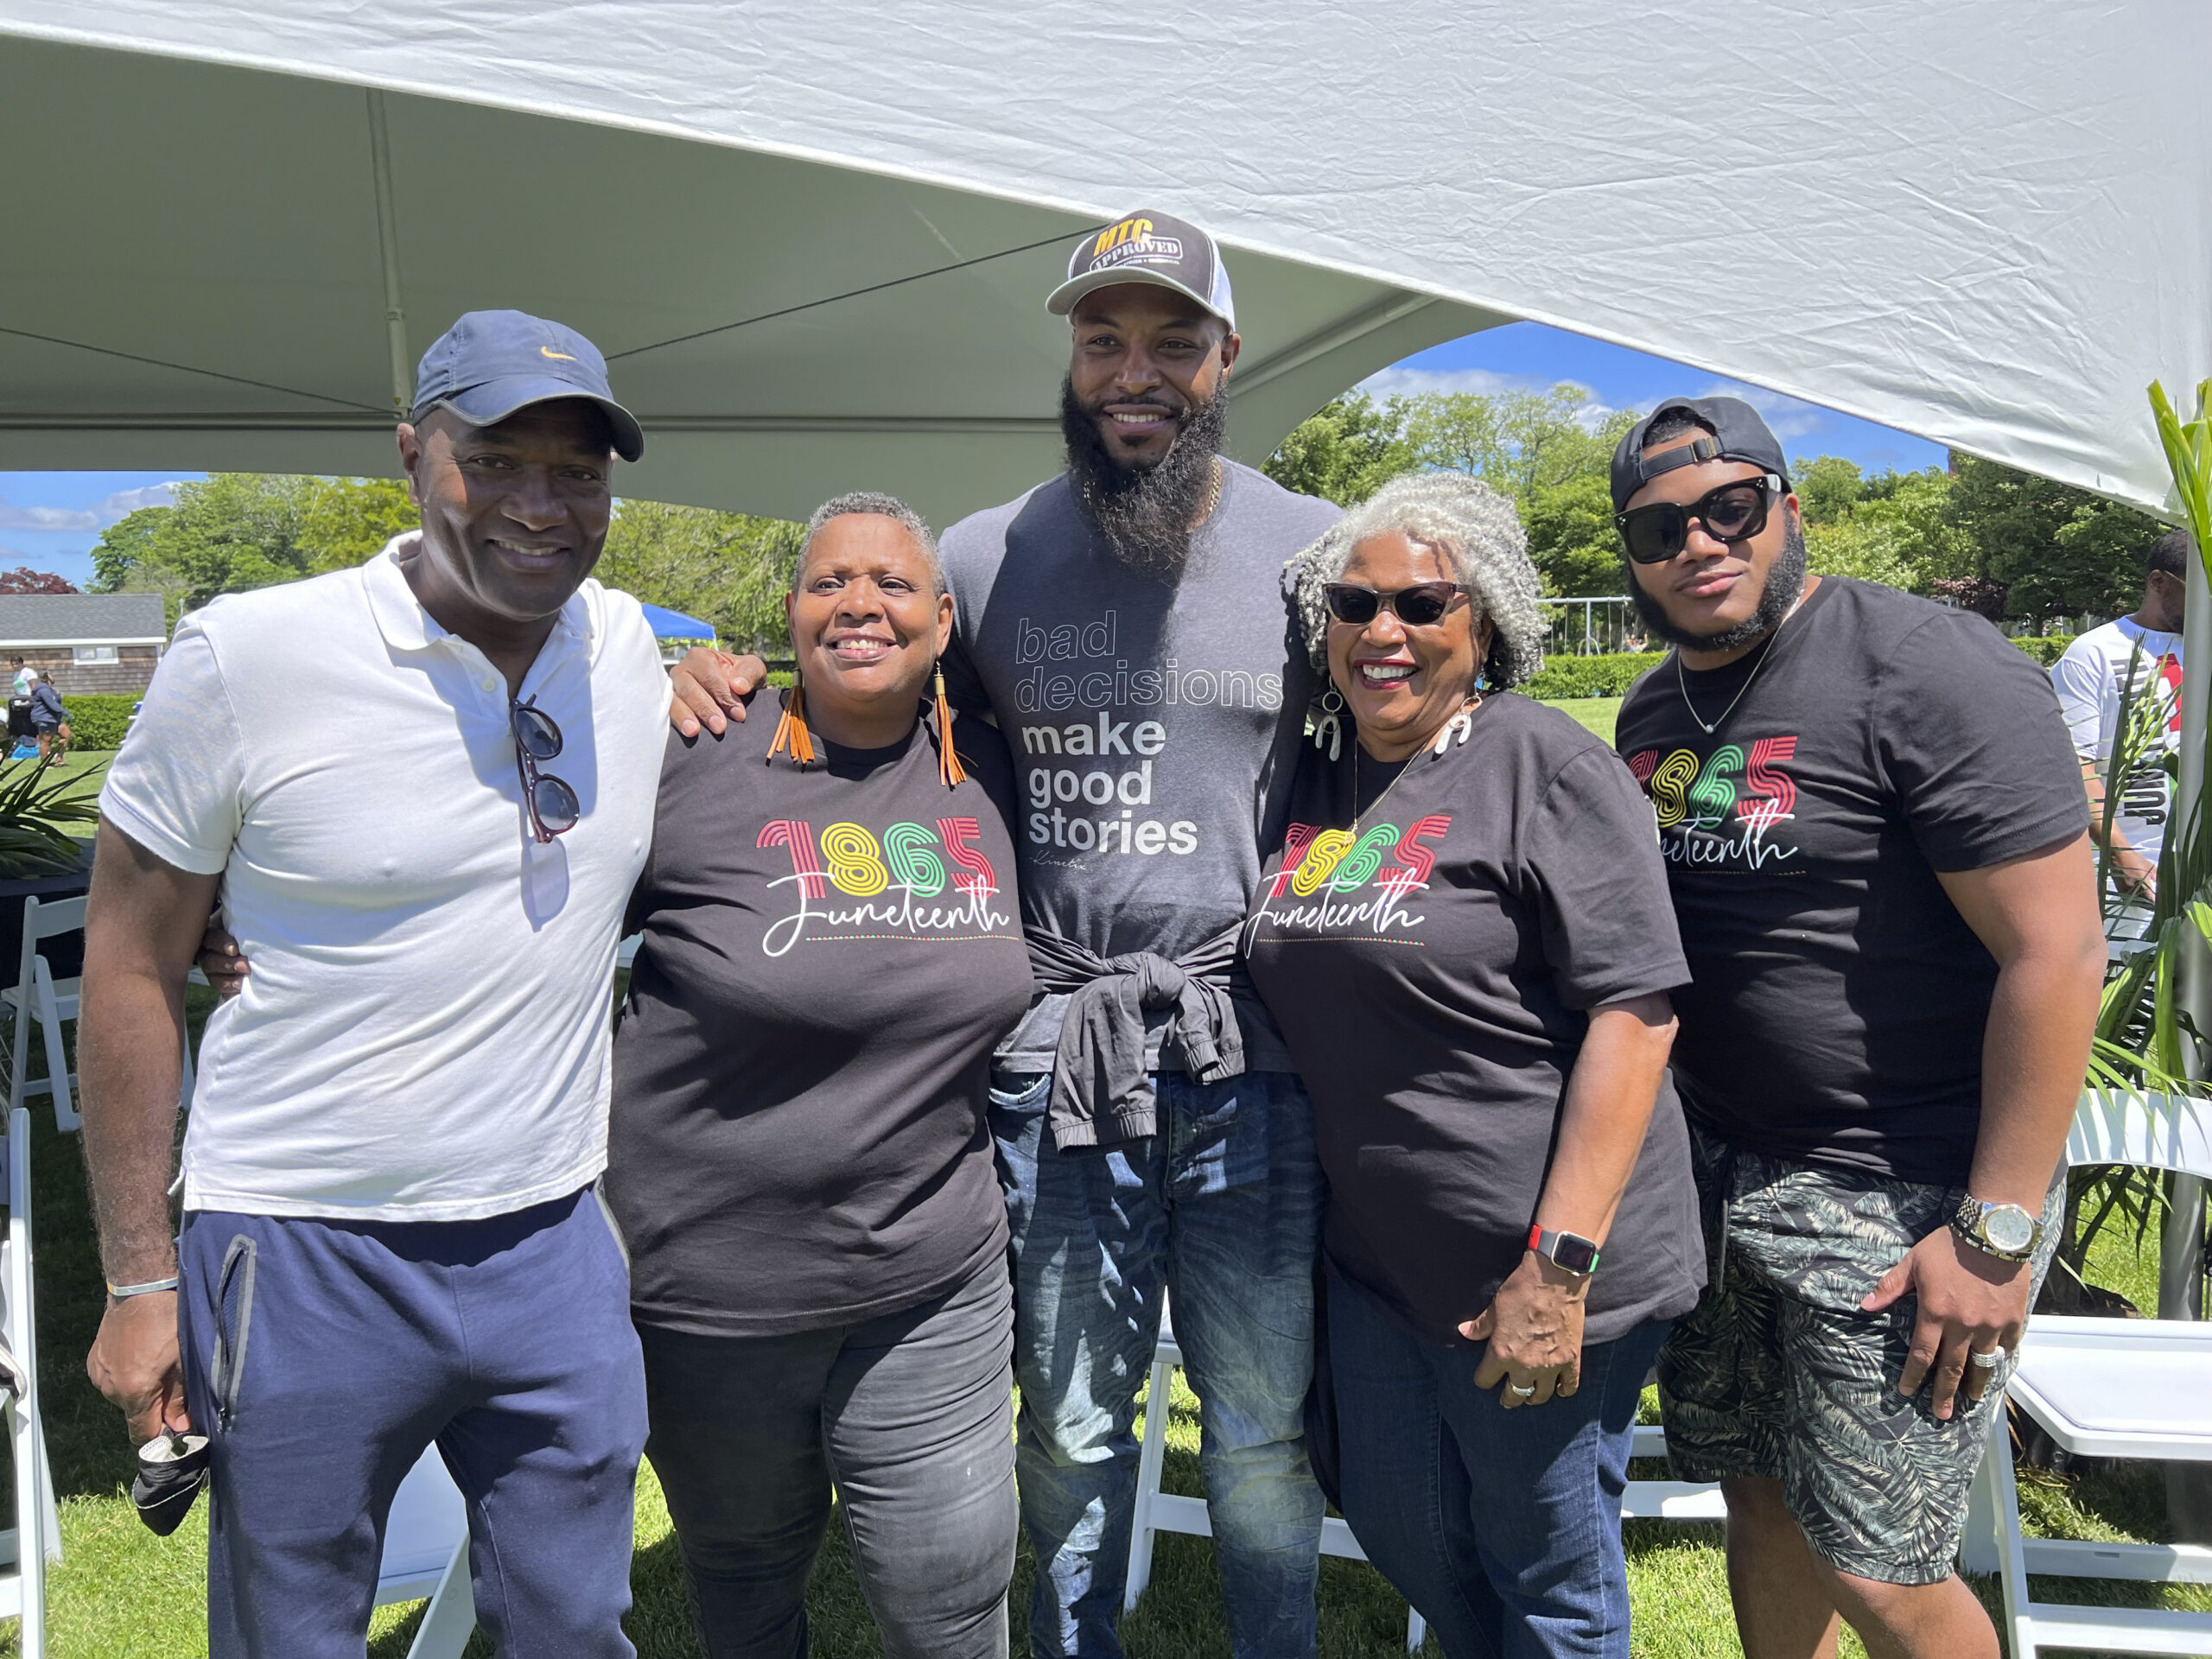 Carl Nelson, Denise Smith Meacham, Jermaine Brantley, Alberta Johnson and Roger Gossom at the Juneteenth celebration in Agawam Park in Southampton on Saturday.   DANA SHAW